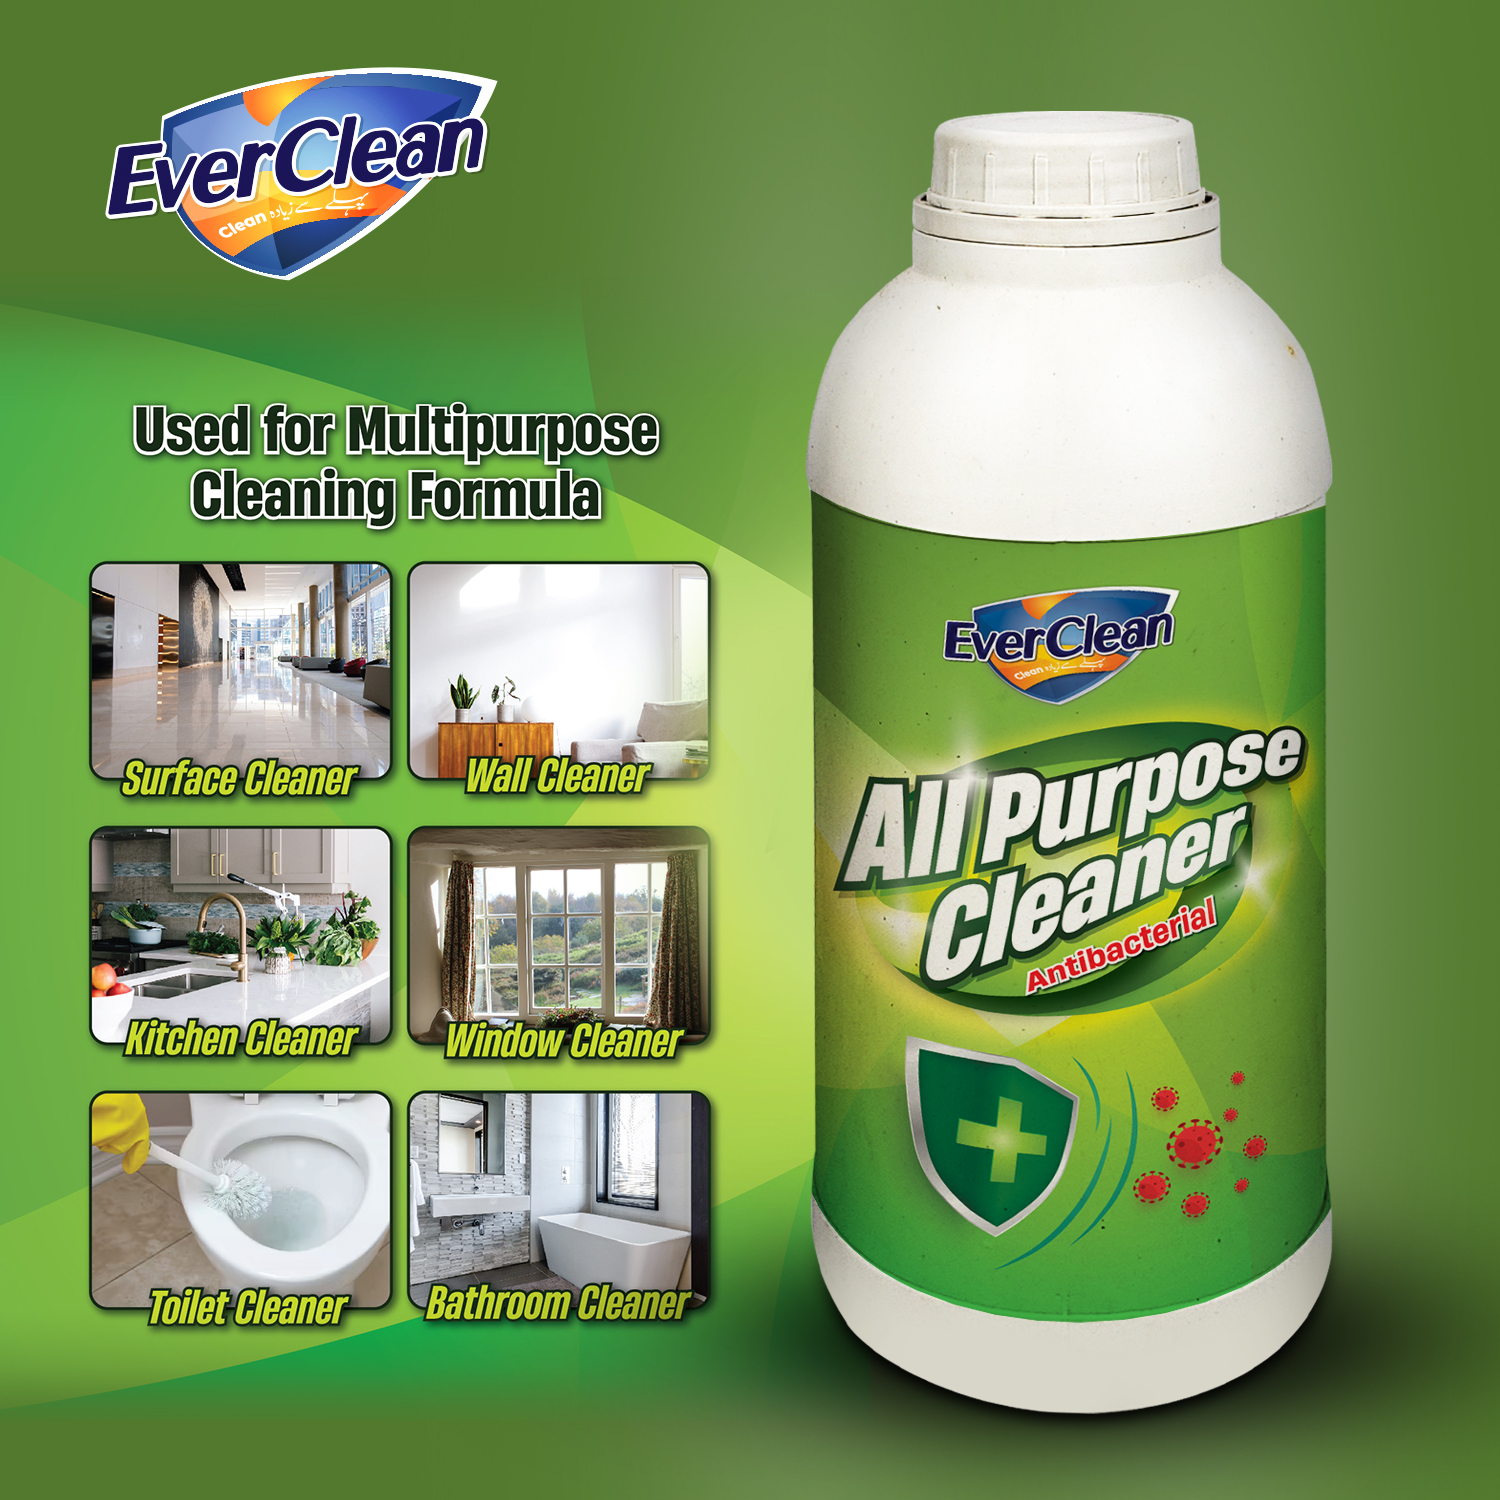 Ever Clean All Purpose Cleaner - Kitchen Cleaner - Bathroom Cleaner - Tough Stain Remover - 100% Germs Remover - Tiles Cleaner - Kitchen Cleaner - Floor Cleaner 1000ml